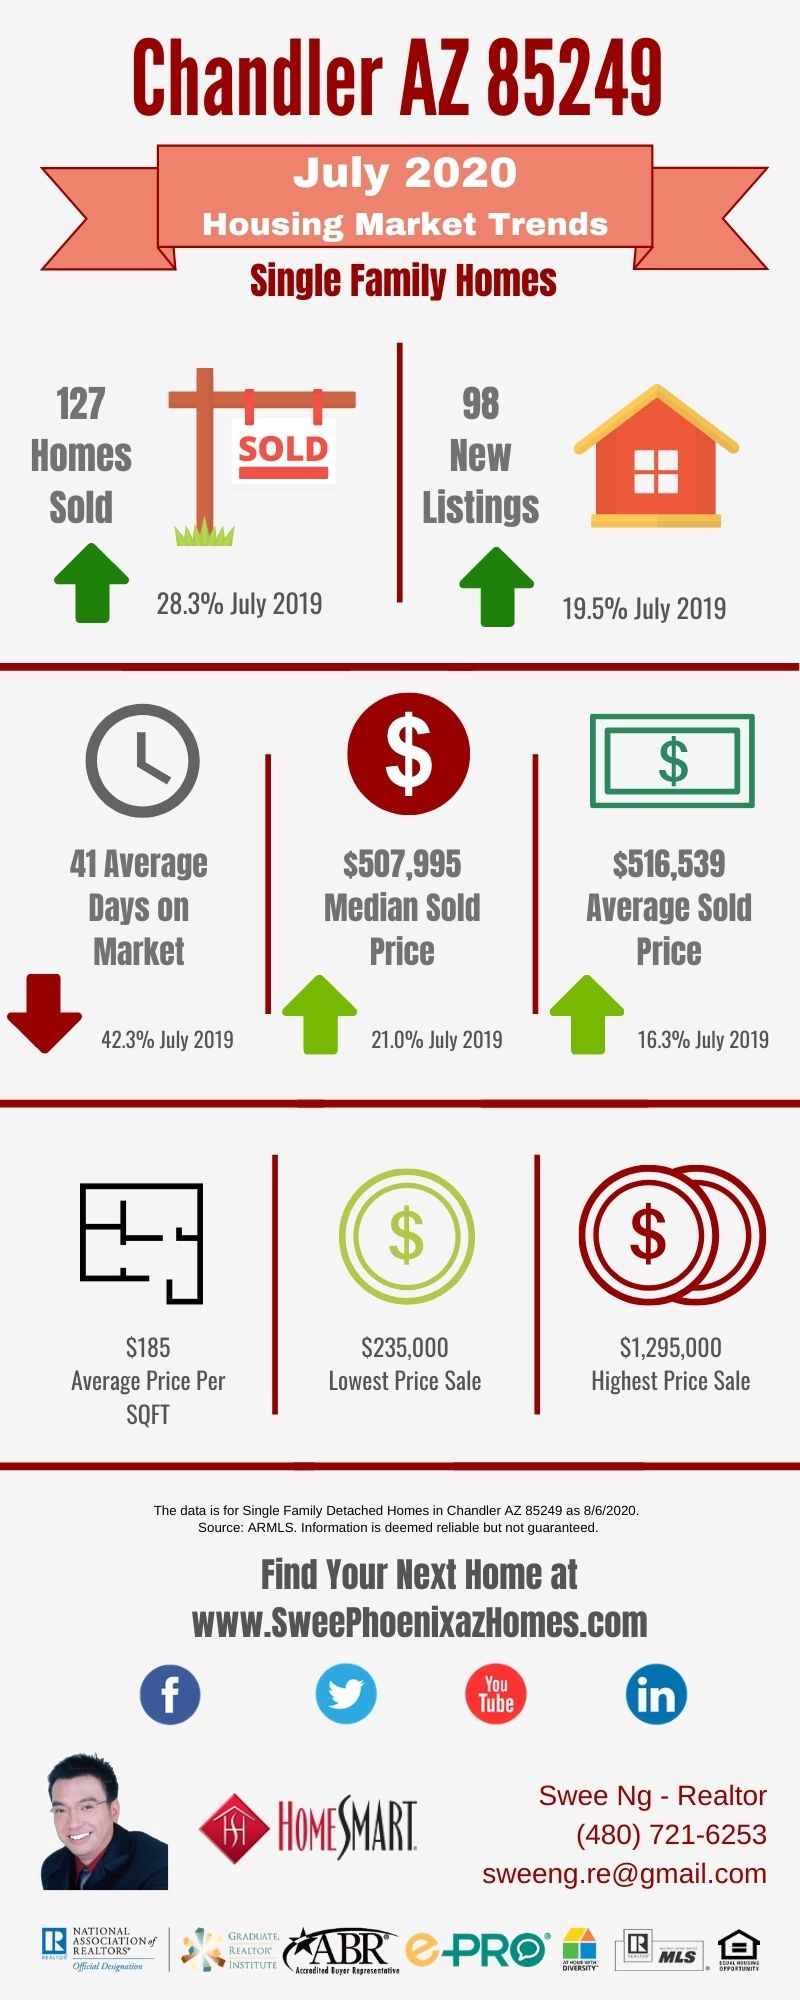 Chandler AZ 85249 Housing Market Trends Report July 2020, House Value, Real Estate and Statistic by Swee Ng